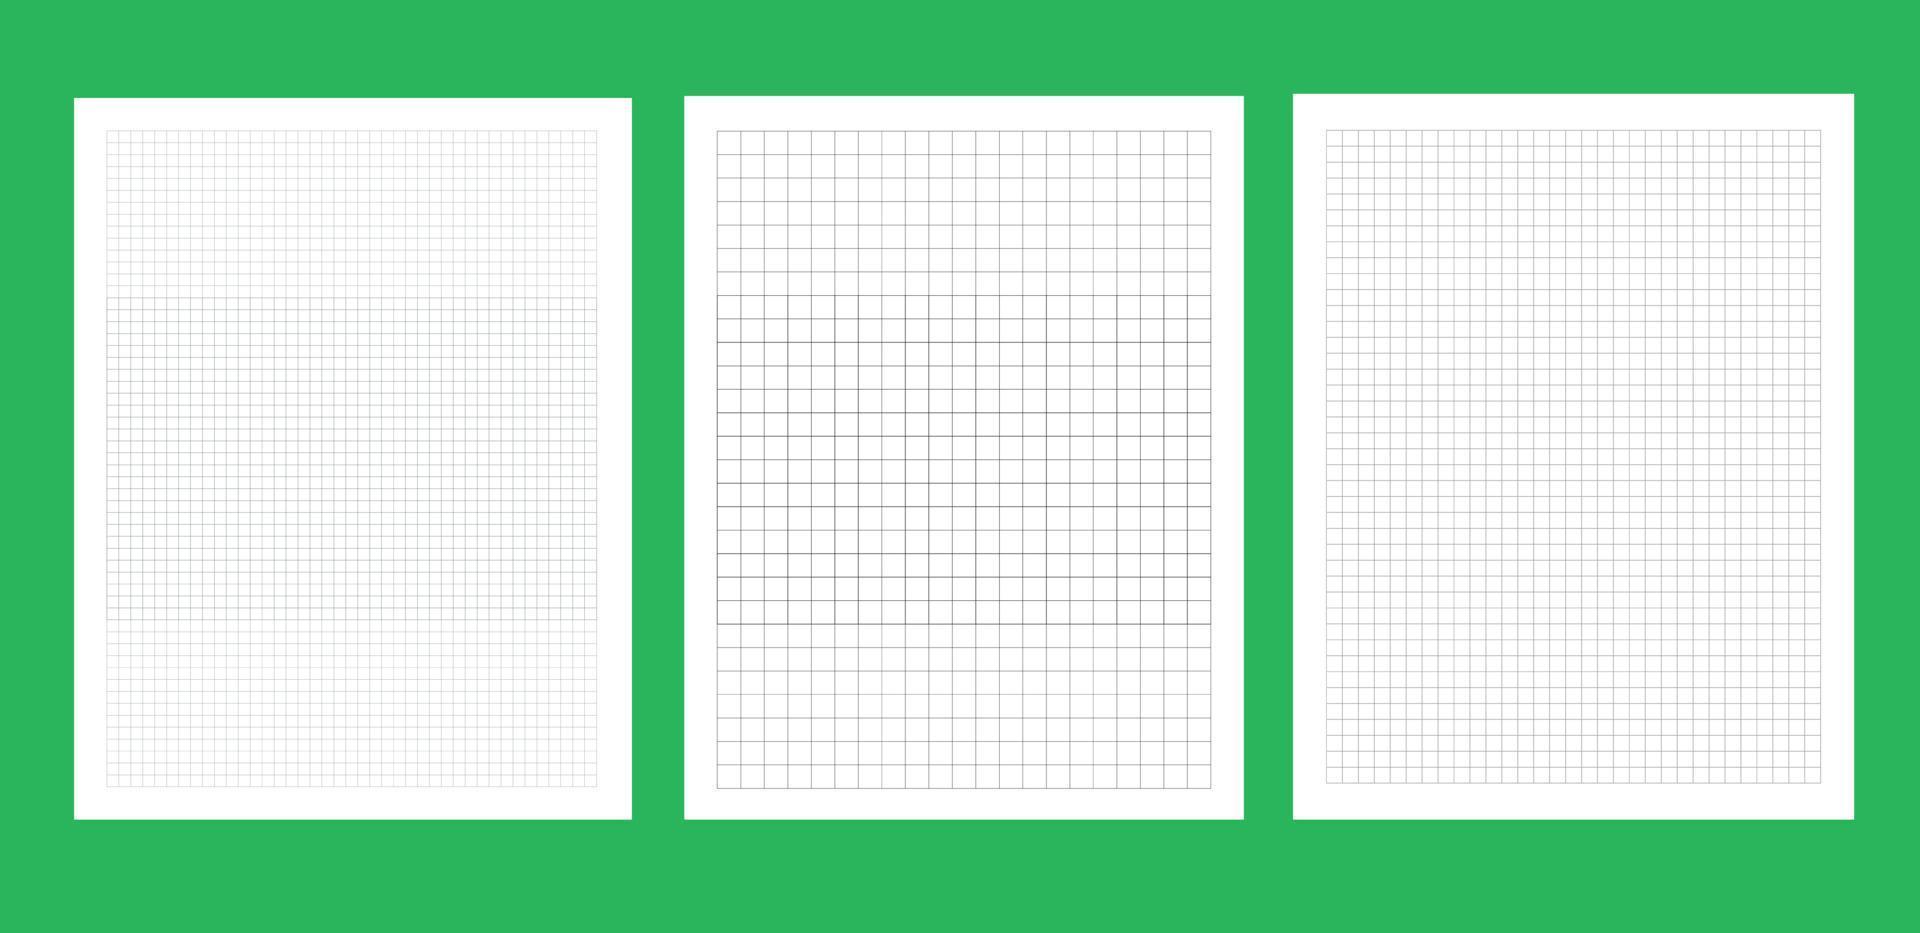 Graph and grid paper page interior design template vector